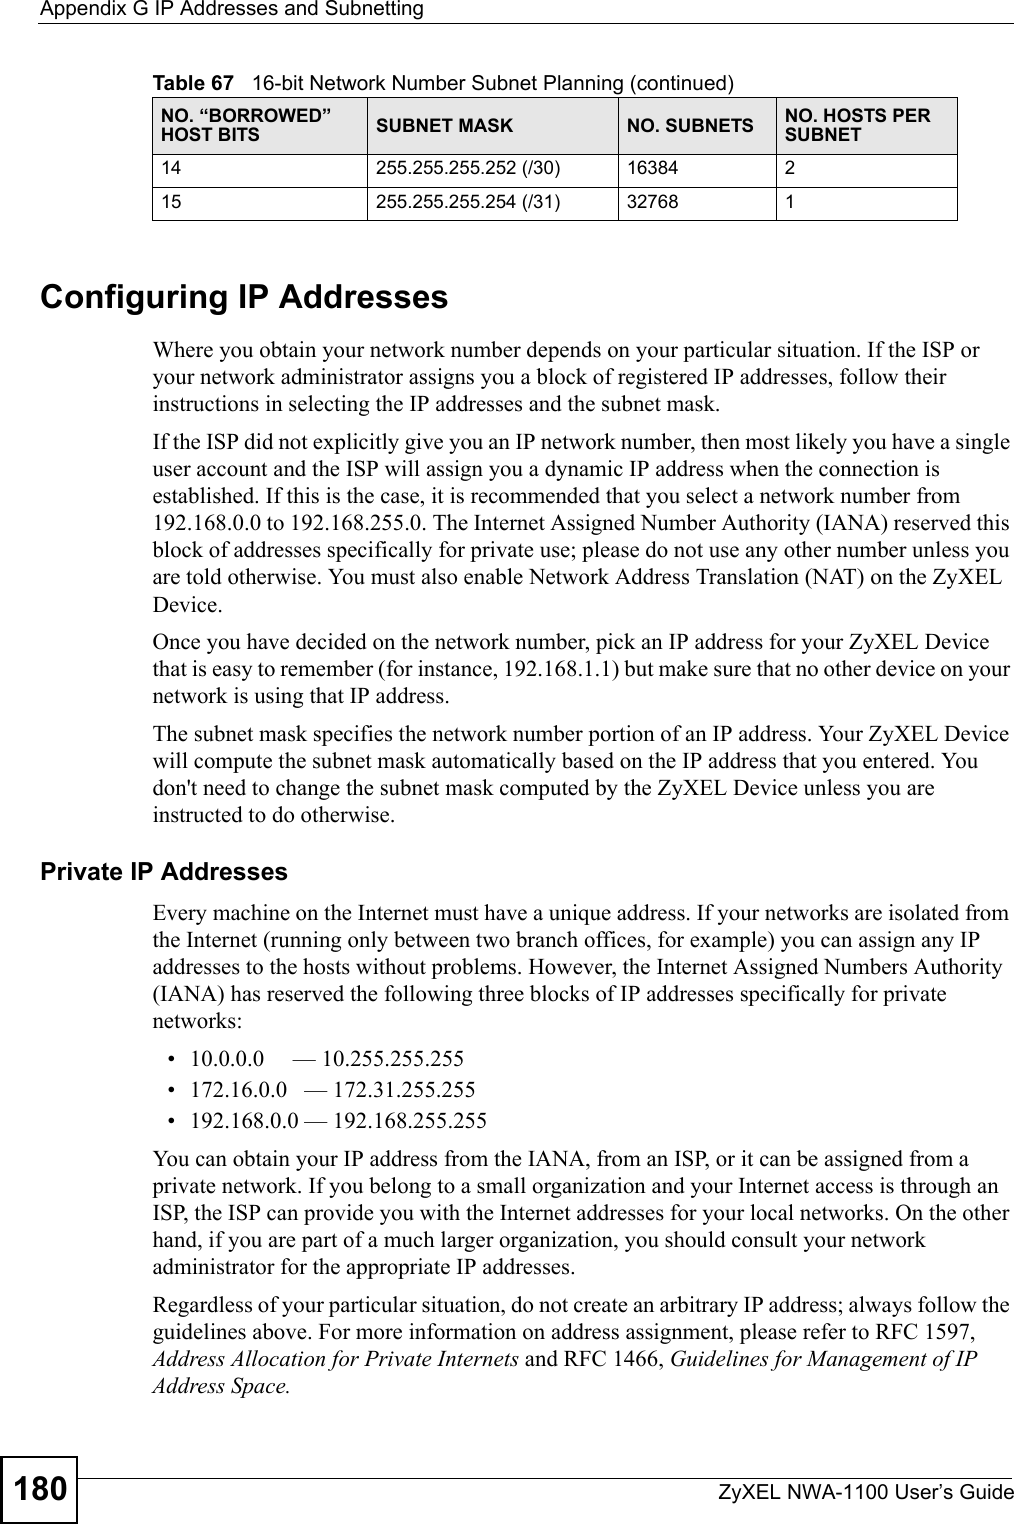 Appendix G IP Addresses and SubnettingZyXEL NWA-1100 User’s Guide180Configuring IP AddressesWhere you obtain your network number depends on your particular situation. If the ISP or your network administrator assigns you a block of registered IP addresses, follow their instructions in selecting the IP addresses and the subnet mask.If the ISP did not explicitly give you an IP network number, then most likely you have a single user account and the ISP will assign you a dynamic IP address when the connection is established. If this is the case, it is recommended that you select a network number from 192.168.0.0 to 192.168.255.0. The Internet Assigned Number Authority (IANA) reserved this block of addresses specifically for private use; please do not use any other number unless you are told otherwise. You must also enable Network Address Translation (NAT) on the ZyXEL Device. Once you have decided on the network number, pick an IP address for your ZyXEL Device that is easy to remember (for instance, 192.168.1.1) but make sure that no other device on your network is using that IP address.The subnet mask specifies the network number portion of an IP address. Your ZyXEL Device will compute the subnet mask automatically based on the IP address that you entered. You don&apos;t need to change the subnet mask computed by the ZyXEL Device unless you are instructed to do otherwise.Private IP AddressesEvery machine on the Internet must have a unique address. If your networks are isolated from the Internet (running only between two branch offices, for example) you can assign any IP addresses to the hosts without problems. However, the Internet Assigned Numbers Authority (IANA) has reserved the following three blocks of IP addresses specifically for private networks:• 10.0.0.0     — 10.255.255.255• 172.16.0.0   — 172.31.255.255• 192.168.0.0 — 192.168.255.255You can obtain your IP address from the IANA, from an ISP, or it can be assigned from a private network. If you belong to a small organization and your Internet access is through an ISP, the ISP can provide you with the Internet addresses for your local networks. On the other hand, if you are part of a much larger organization, you should consult your network administrator for the appropriate IP addresses.Regardless of your particular situation, do not create an arbitrary IP address; always follow the guidelines above. For more information on address assignment, please refer to RFC 1597, Address Allocation for Private Internets and RFC 1466, Guidelines for Management of IP Address Space.14 255.255.255.252 (/30) 16384 215 255.255.255.254 (/31) 32768 1Table 67   16-bit Network Number Subnet Planning (continued)NO. “BORROWED” HOST BITS SUBNET MASK NO. SUBNETS NO. HOSTS PER SUBNET